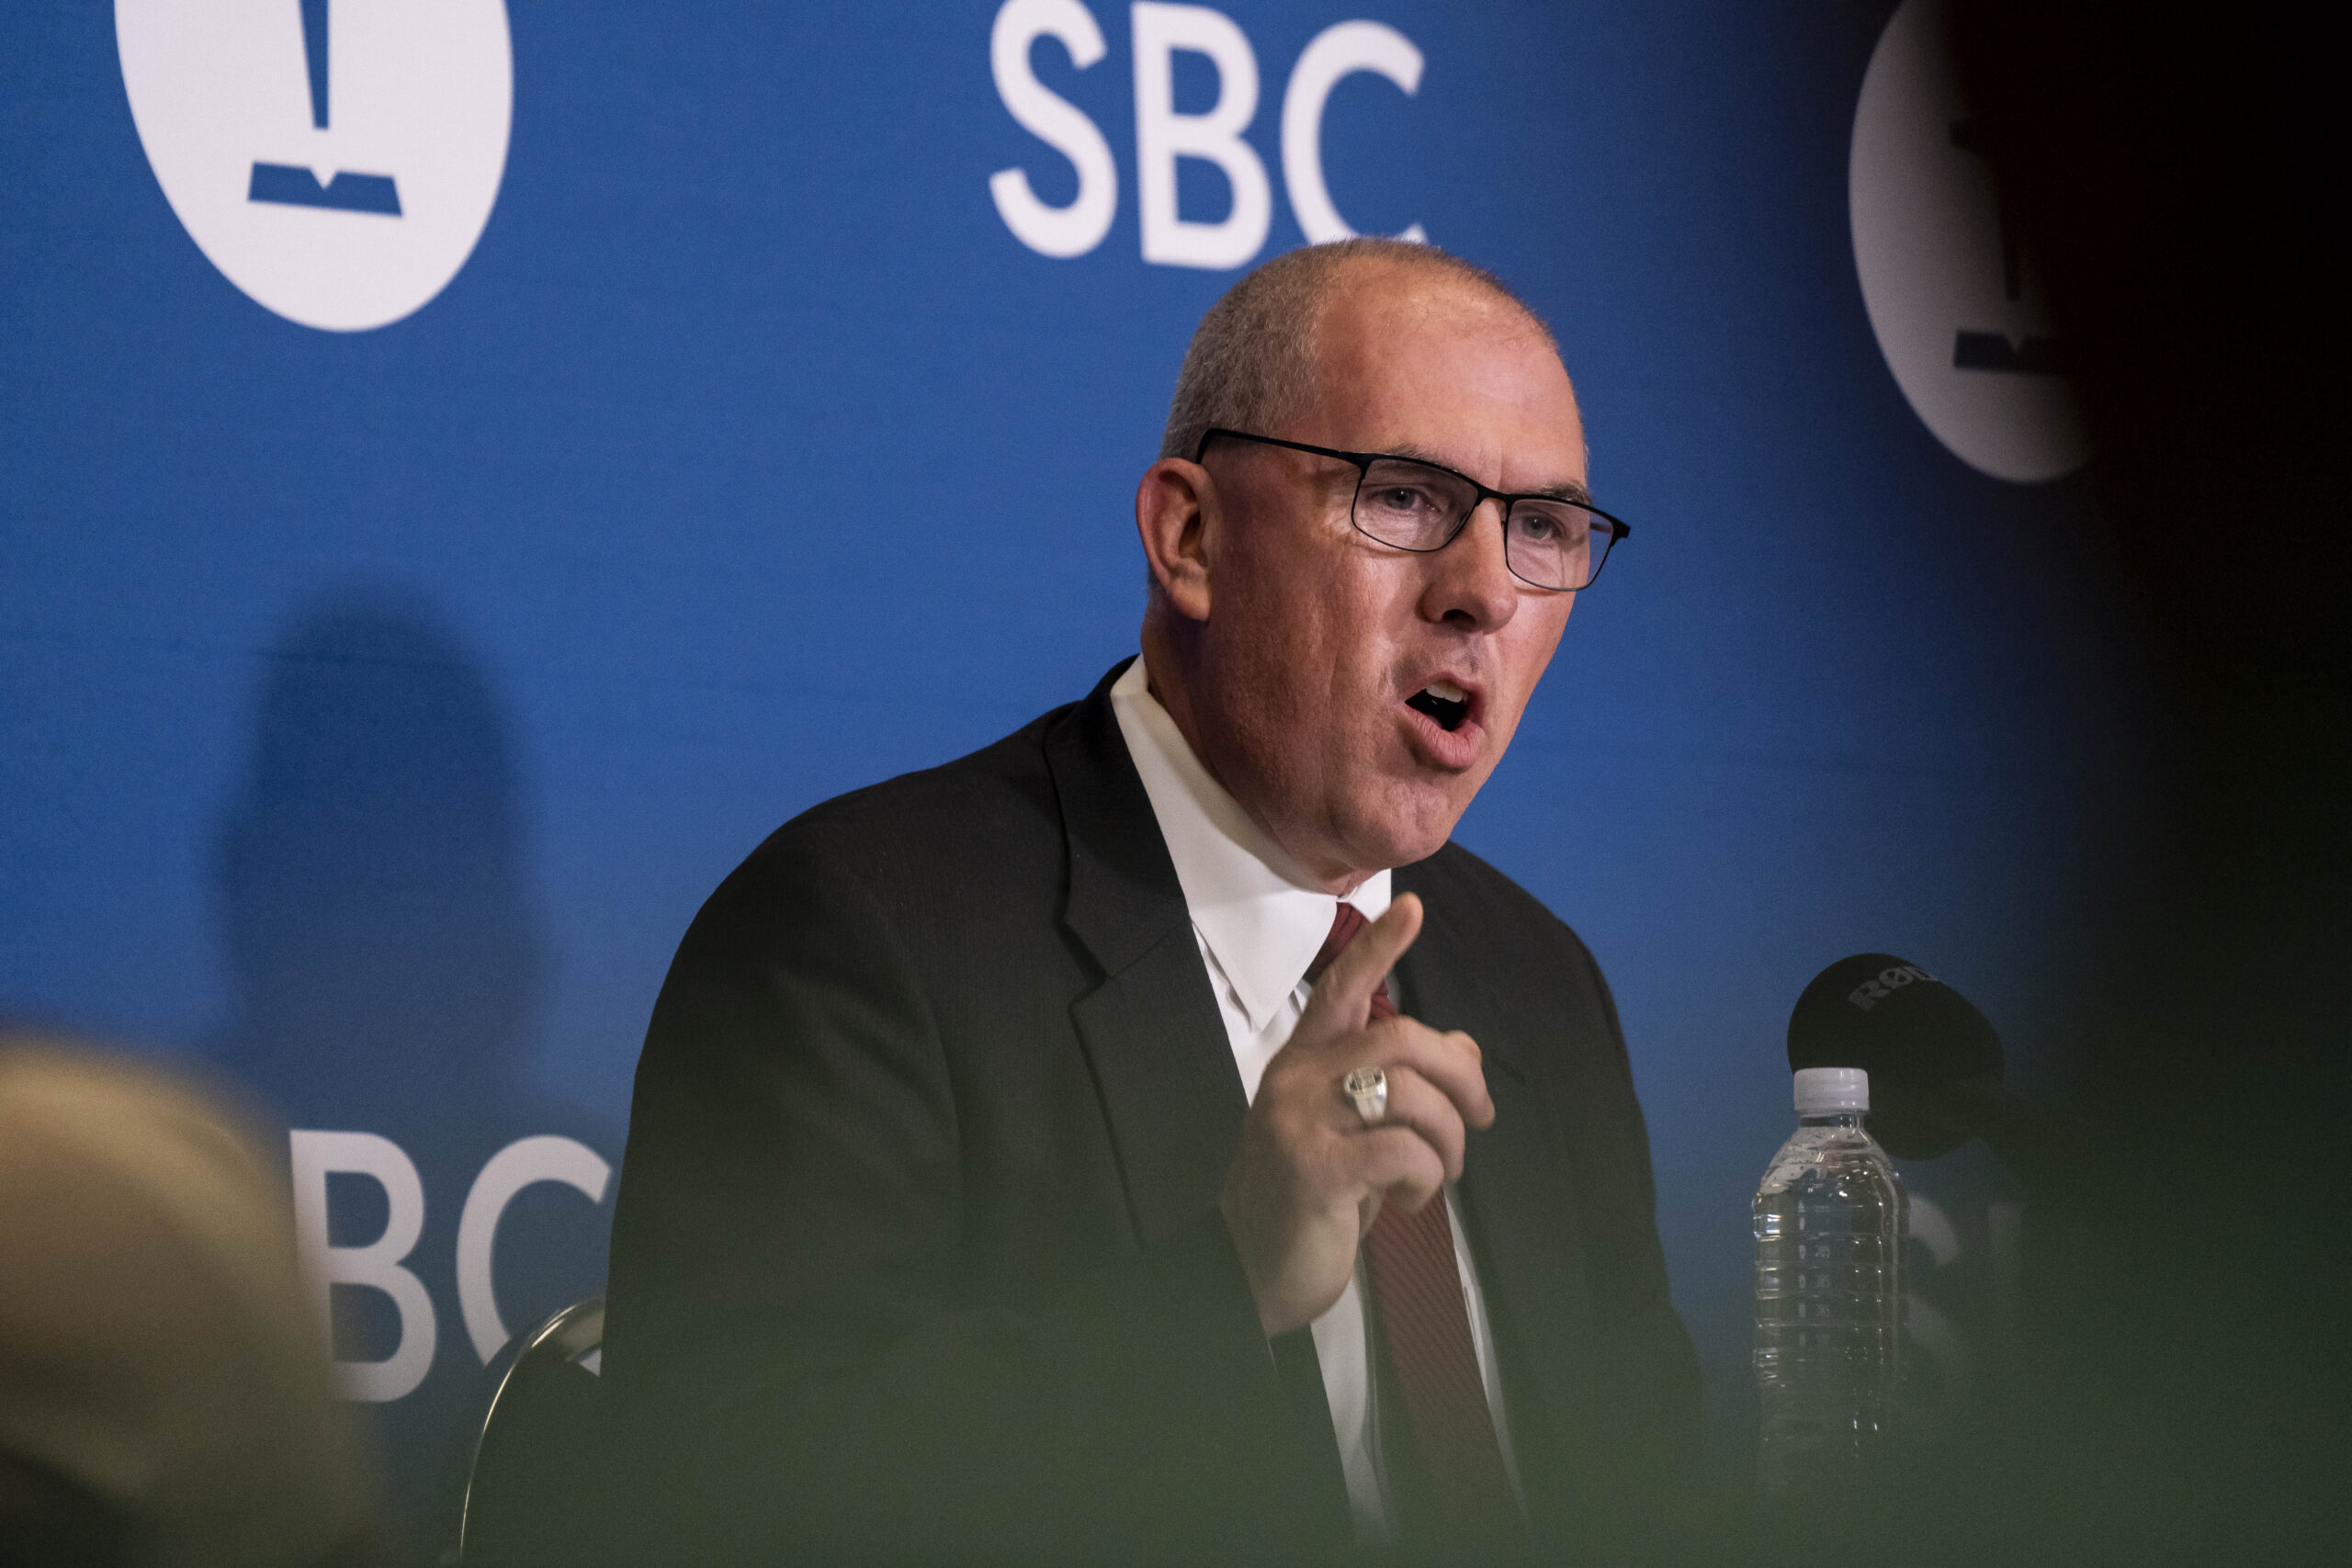 Newly elected SBC President Bart Barber speaks during a press conference at the Southern Baptist Convention annual meeting, held at the Anaheim Convention Center in Anaheim, California, on Wednesday, June 15, 2022. Photo by Justin L. Stewart/Religion News Service